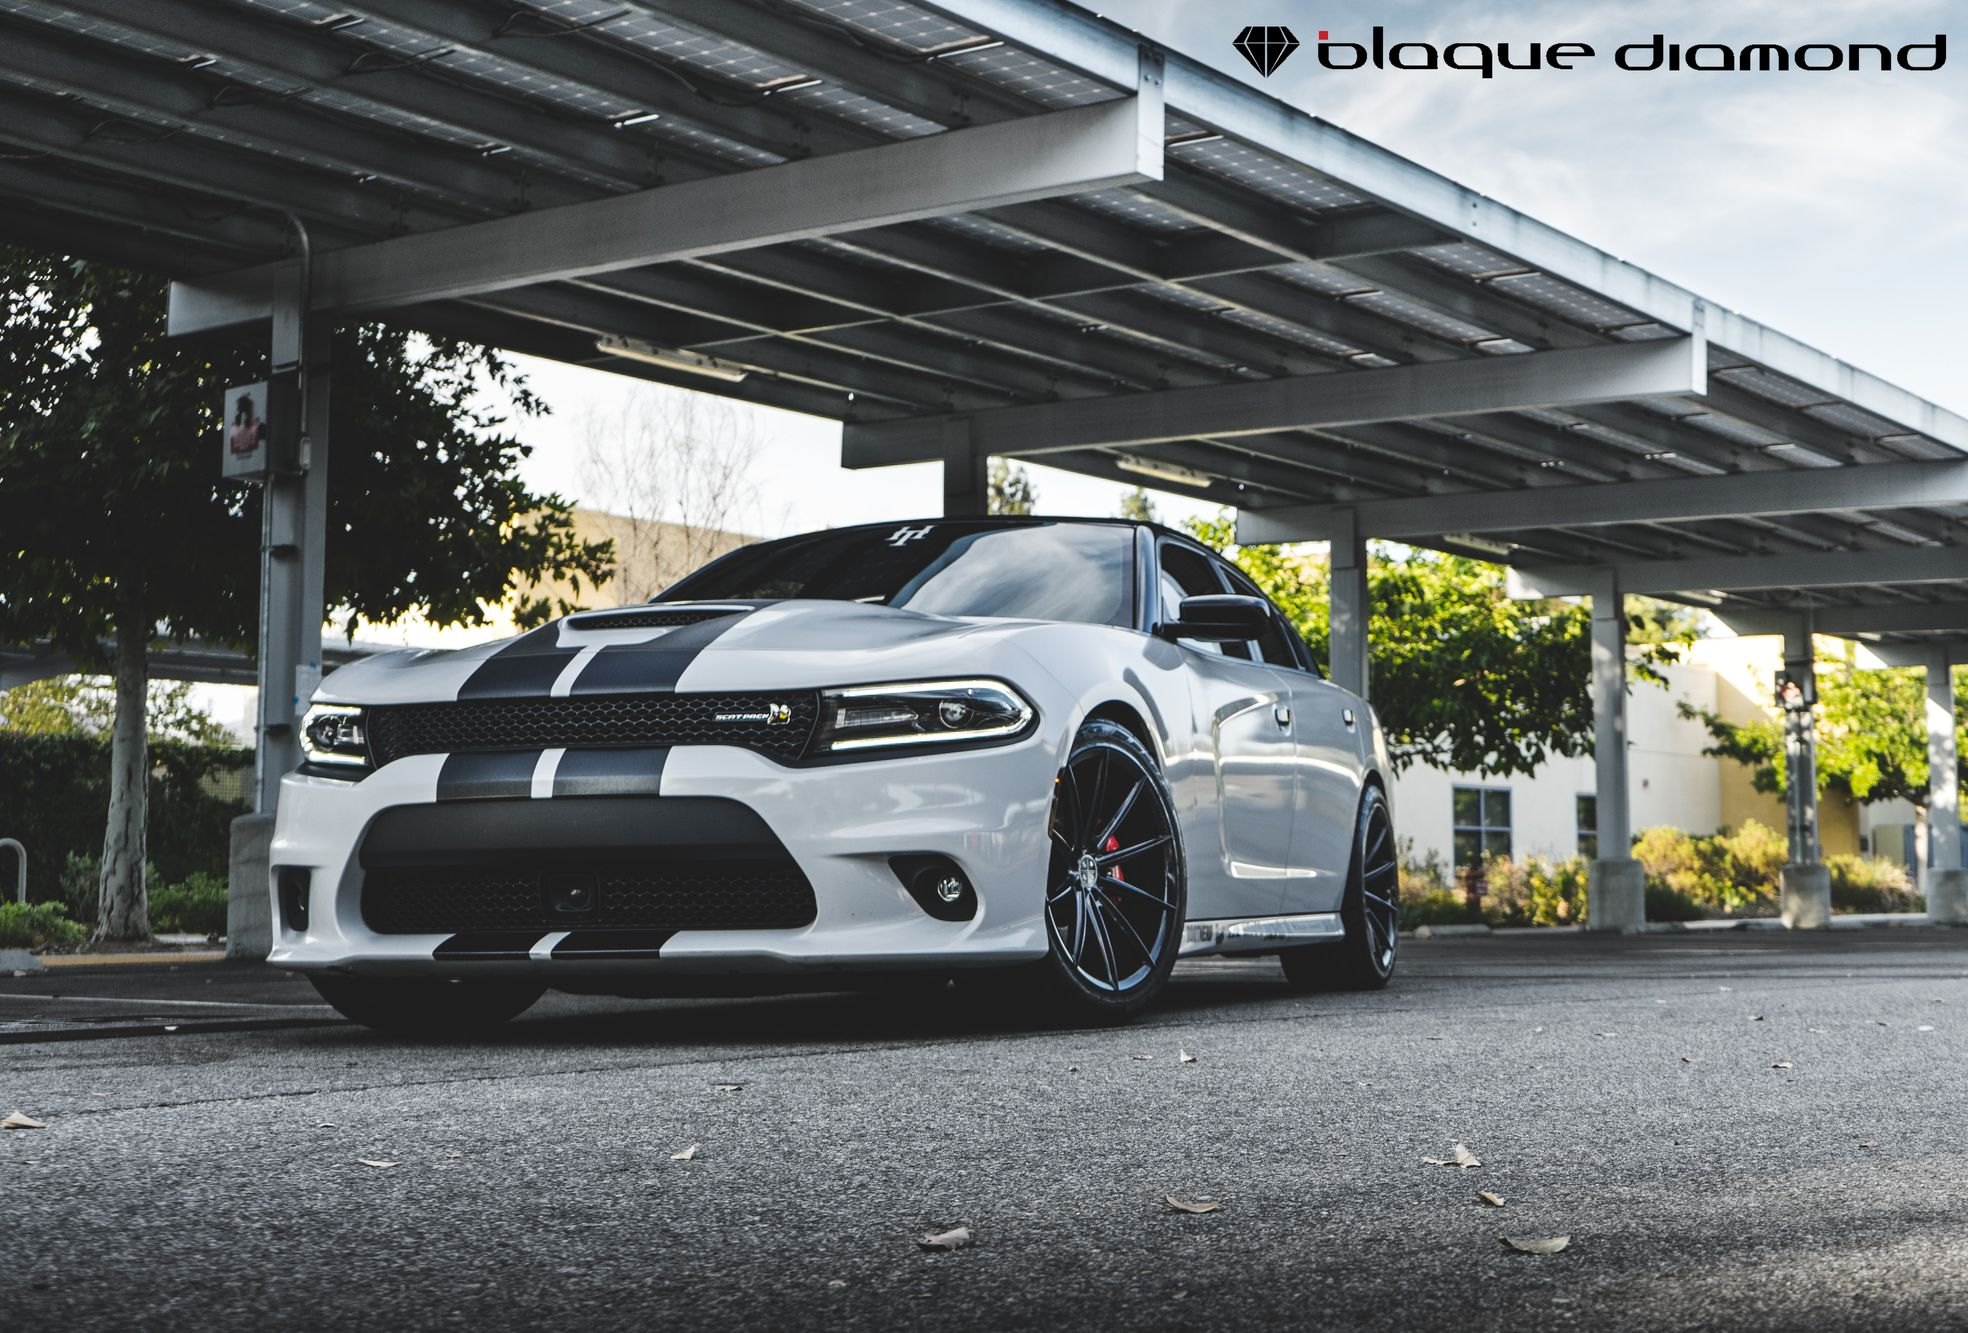 Custom White Dodge Charger with Black Stripes - Photo by Blaque Diamond